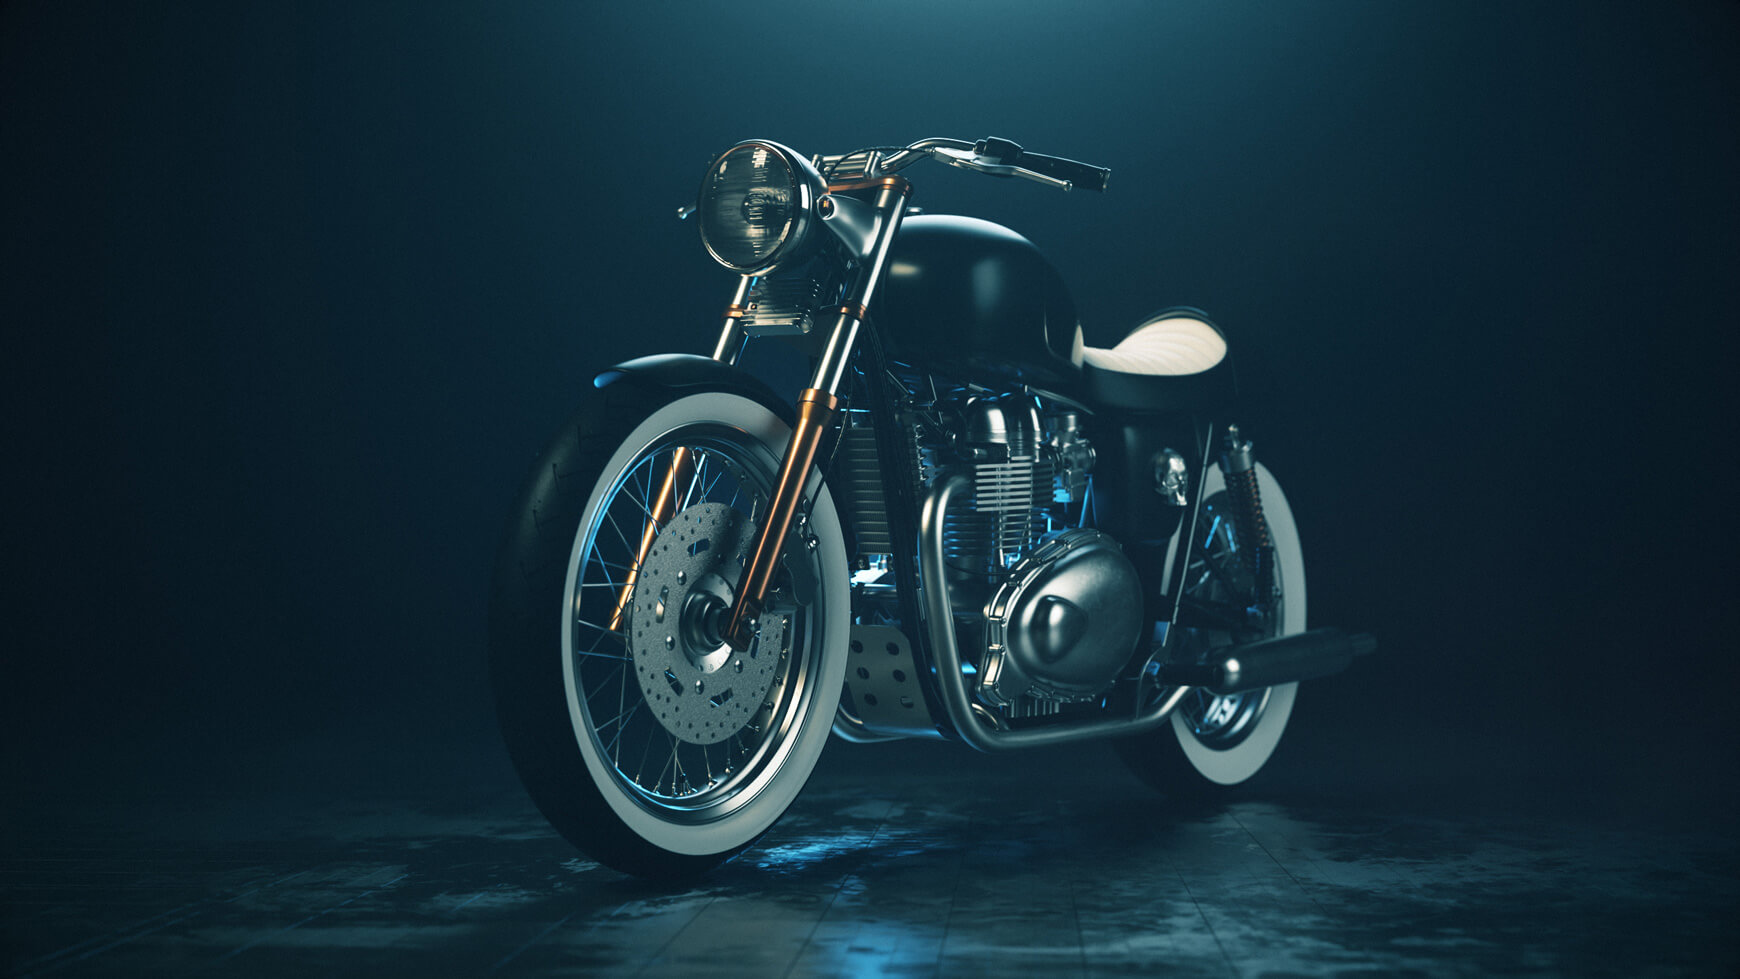 Cinema 4D 3D Model Free Motorcycle Texture Contest